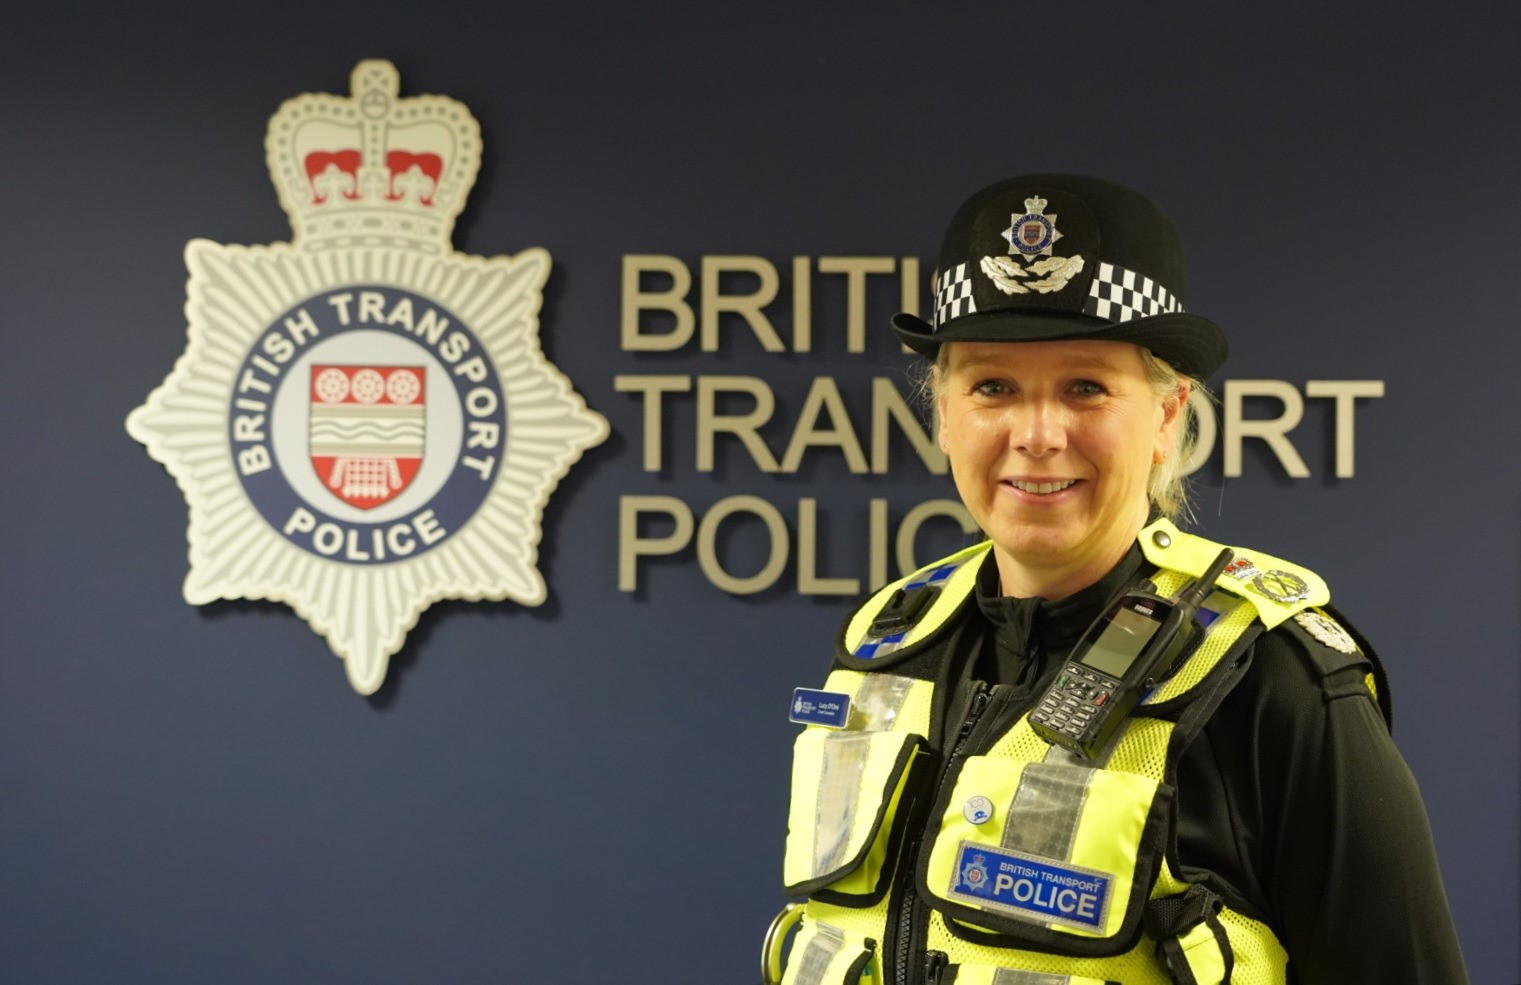 BTPA welcomes new British Transport Police Chief Constable Lucy D’Orsi